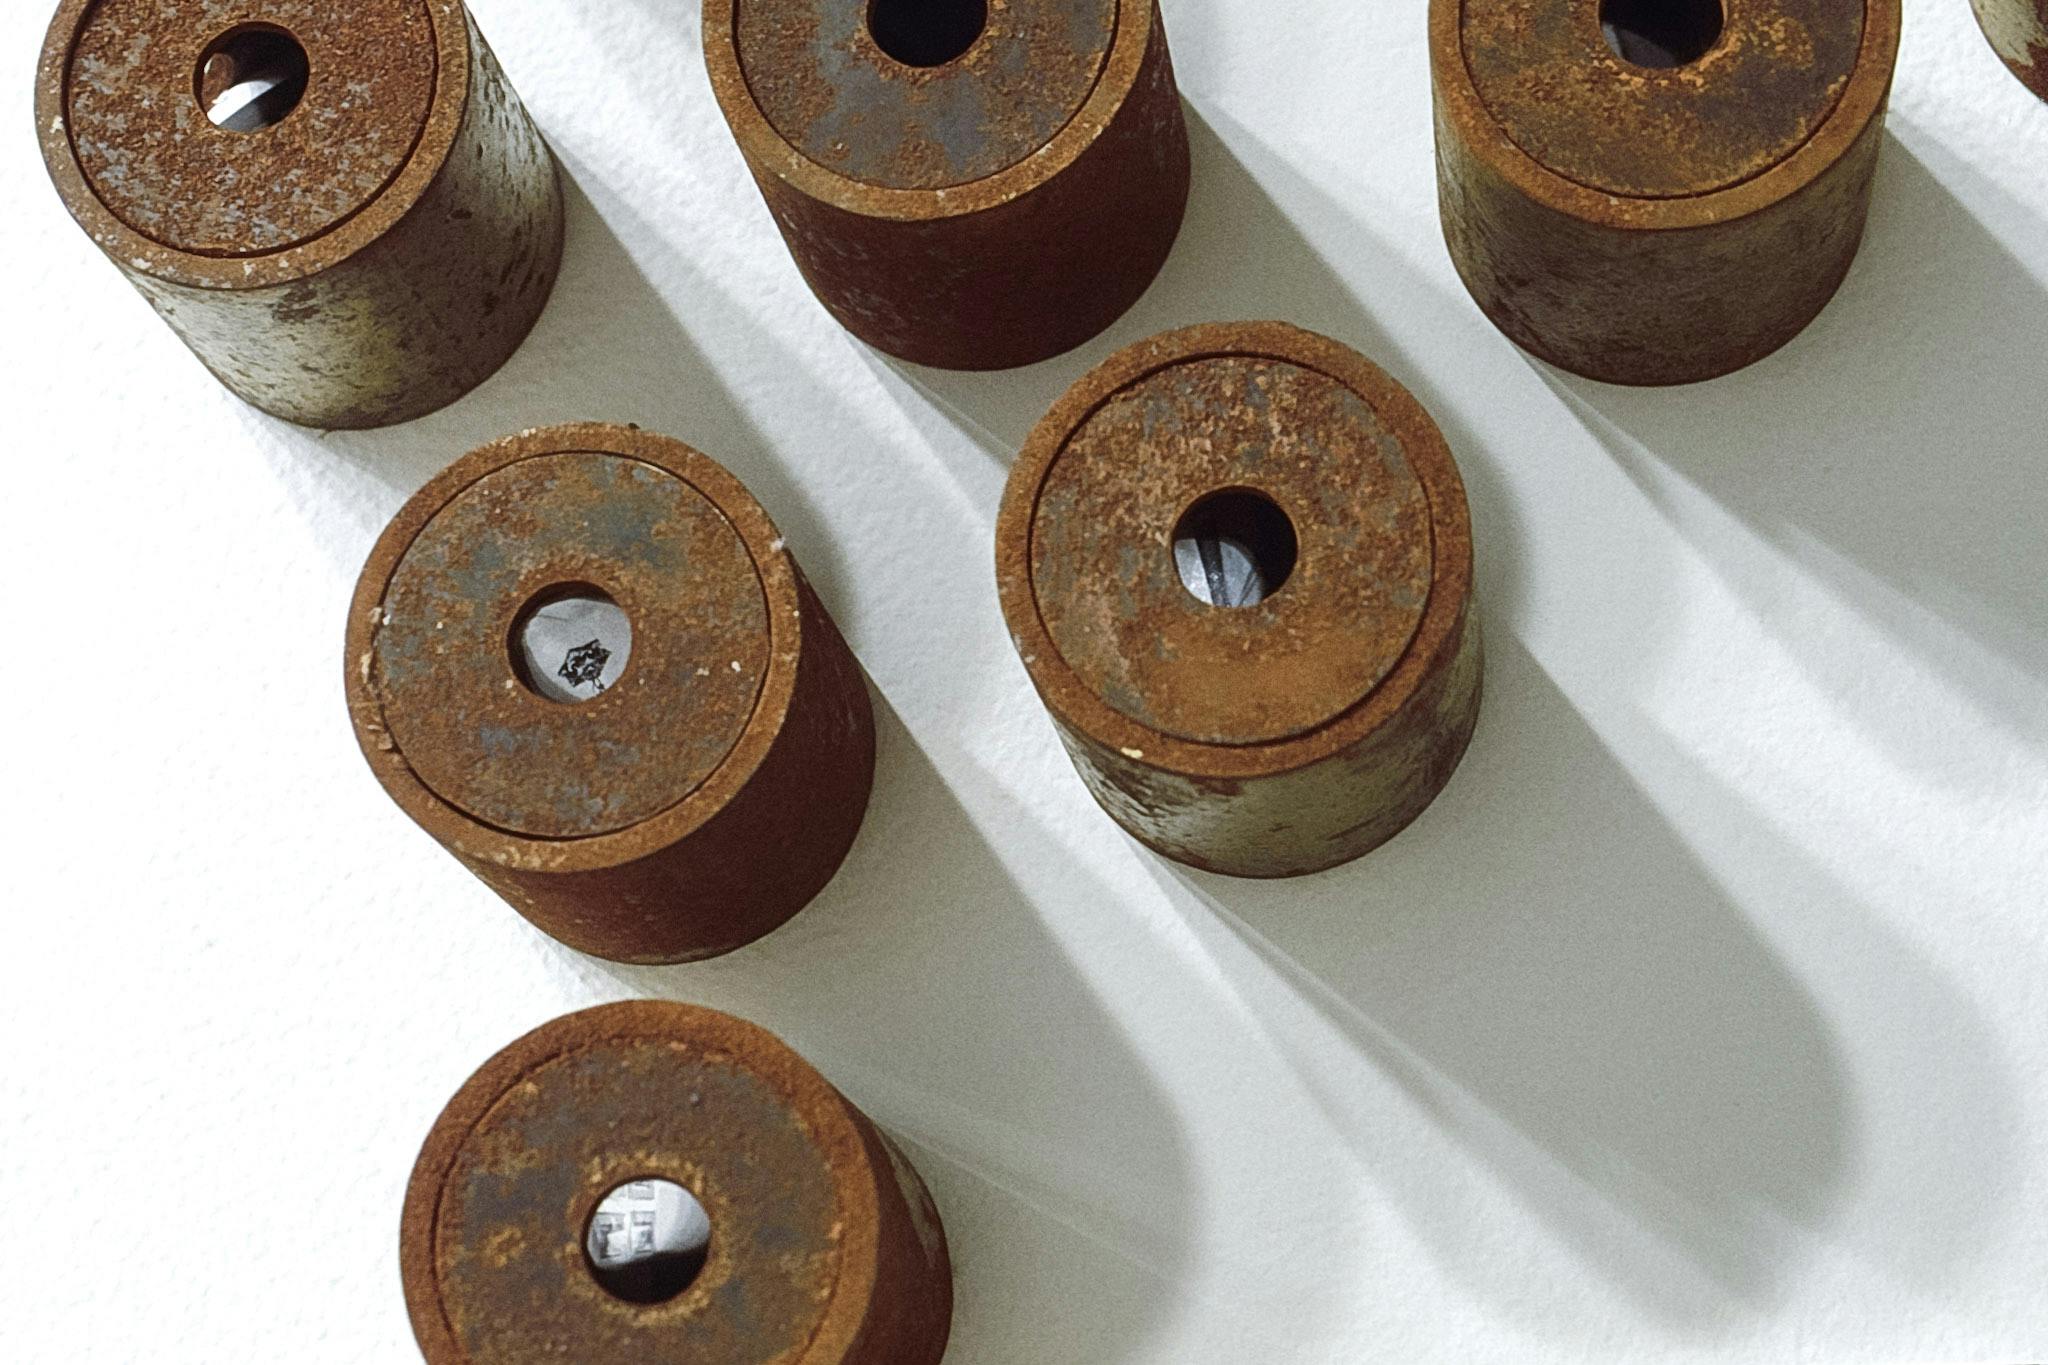 Six short cylinders are visible in this image. They are made of rusted metal. Viewers can peek at the black and white image at the bottom of each cylinder through the hole on top of each cylinder.  